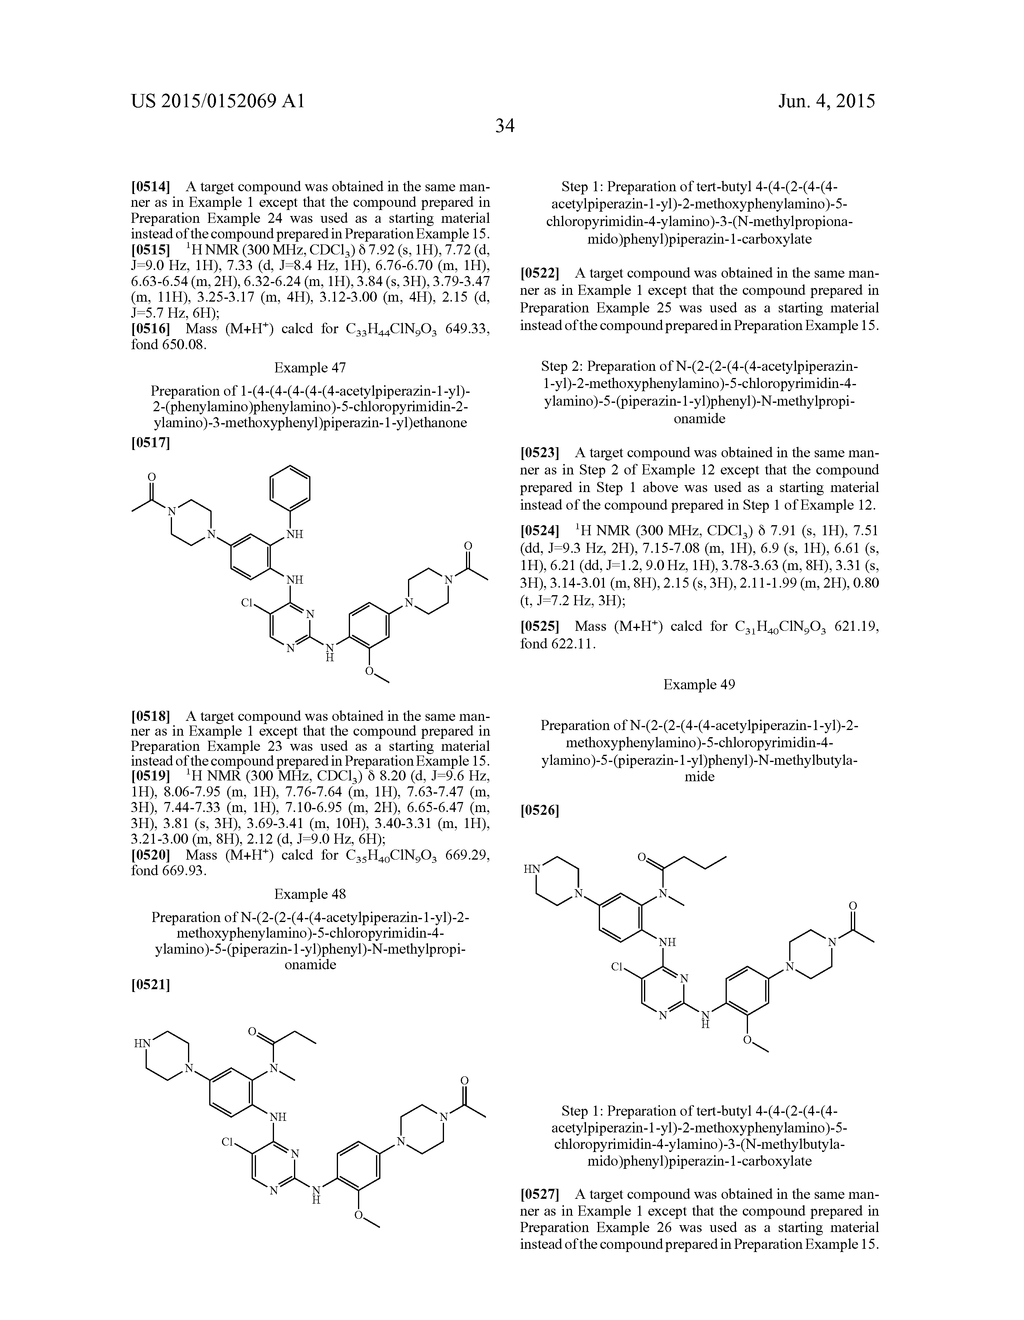 N2,N4-BIS(4-(PIPERAZINE-1-YL)PHENYL)PIRIMIDINE-2,4-DIAMINE DERIVATIVE OR     PHARMACEUTICALLY ACCEPTABLE SALT THEREOF, AND COMPOSITION CONTAINING SAME     AS ACTIVE INGREDIENT FOR PREVENTING OR TREATING CANCER - diagram, schematic, and image 38